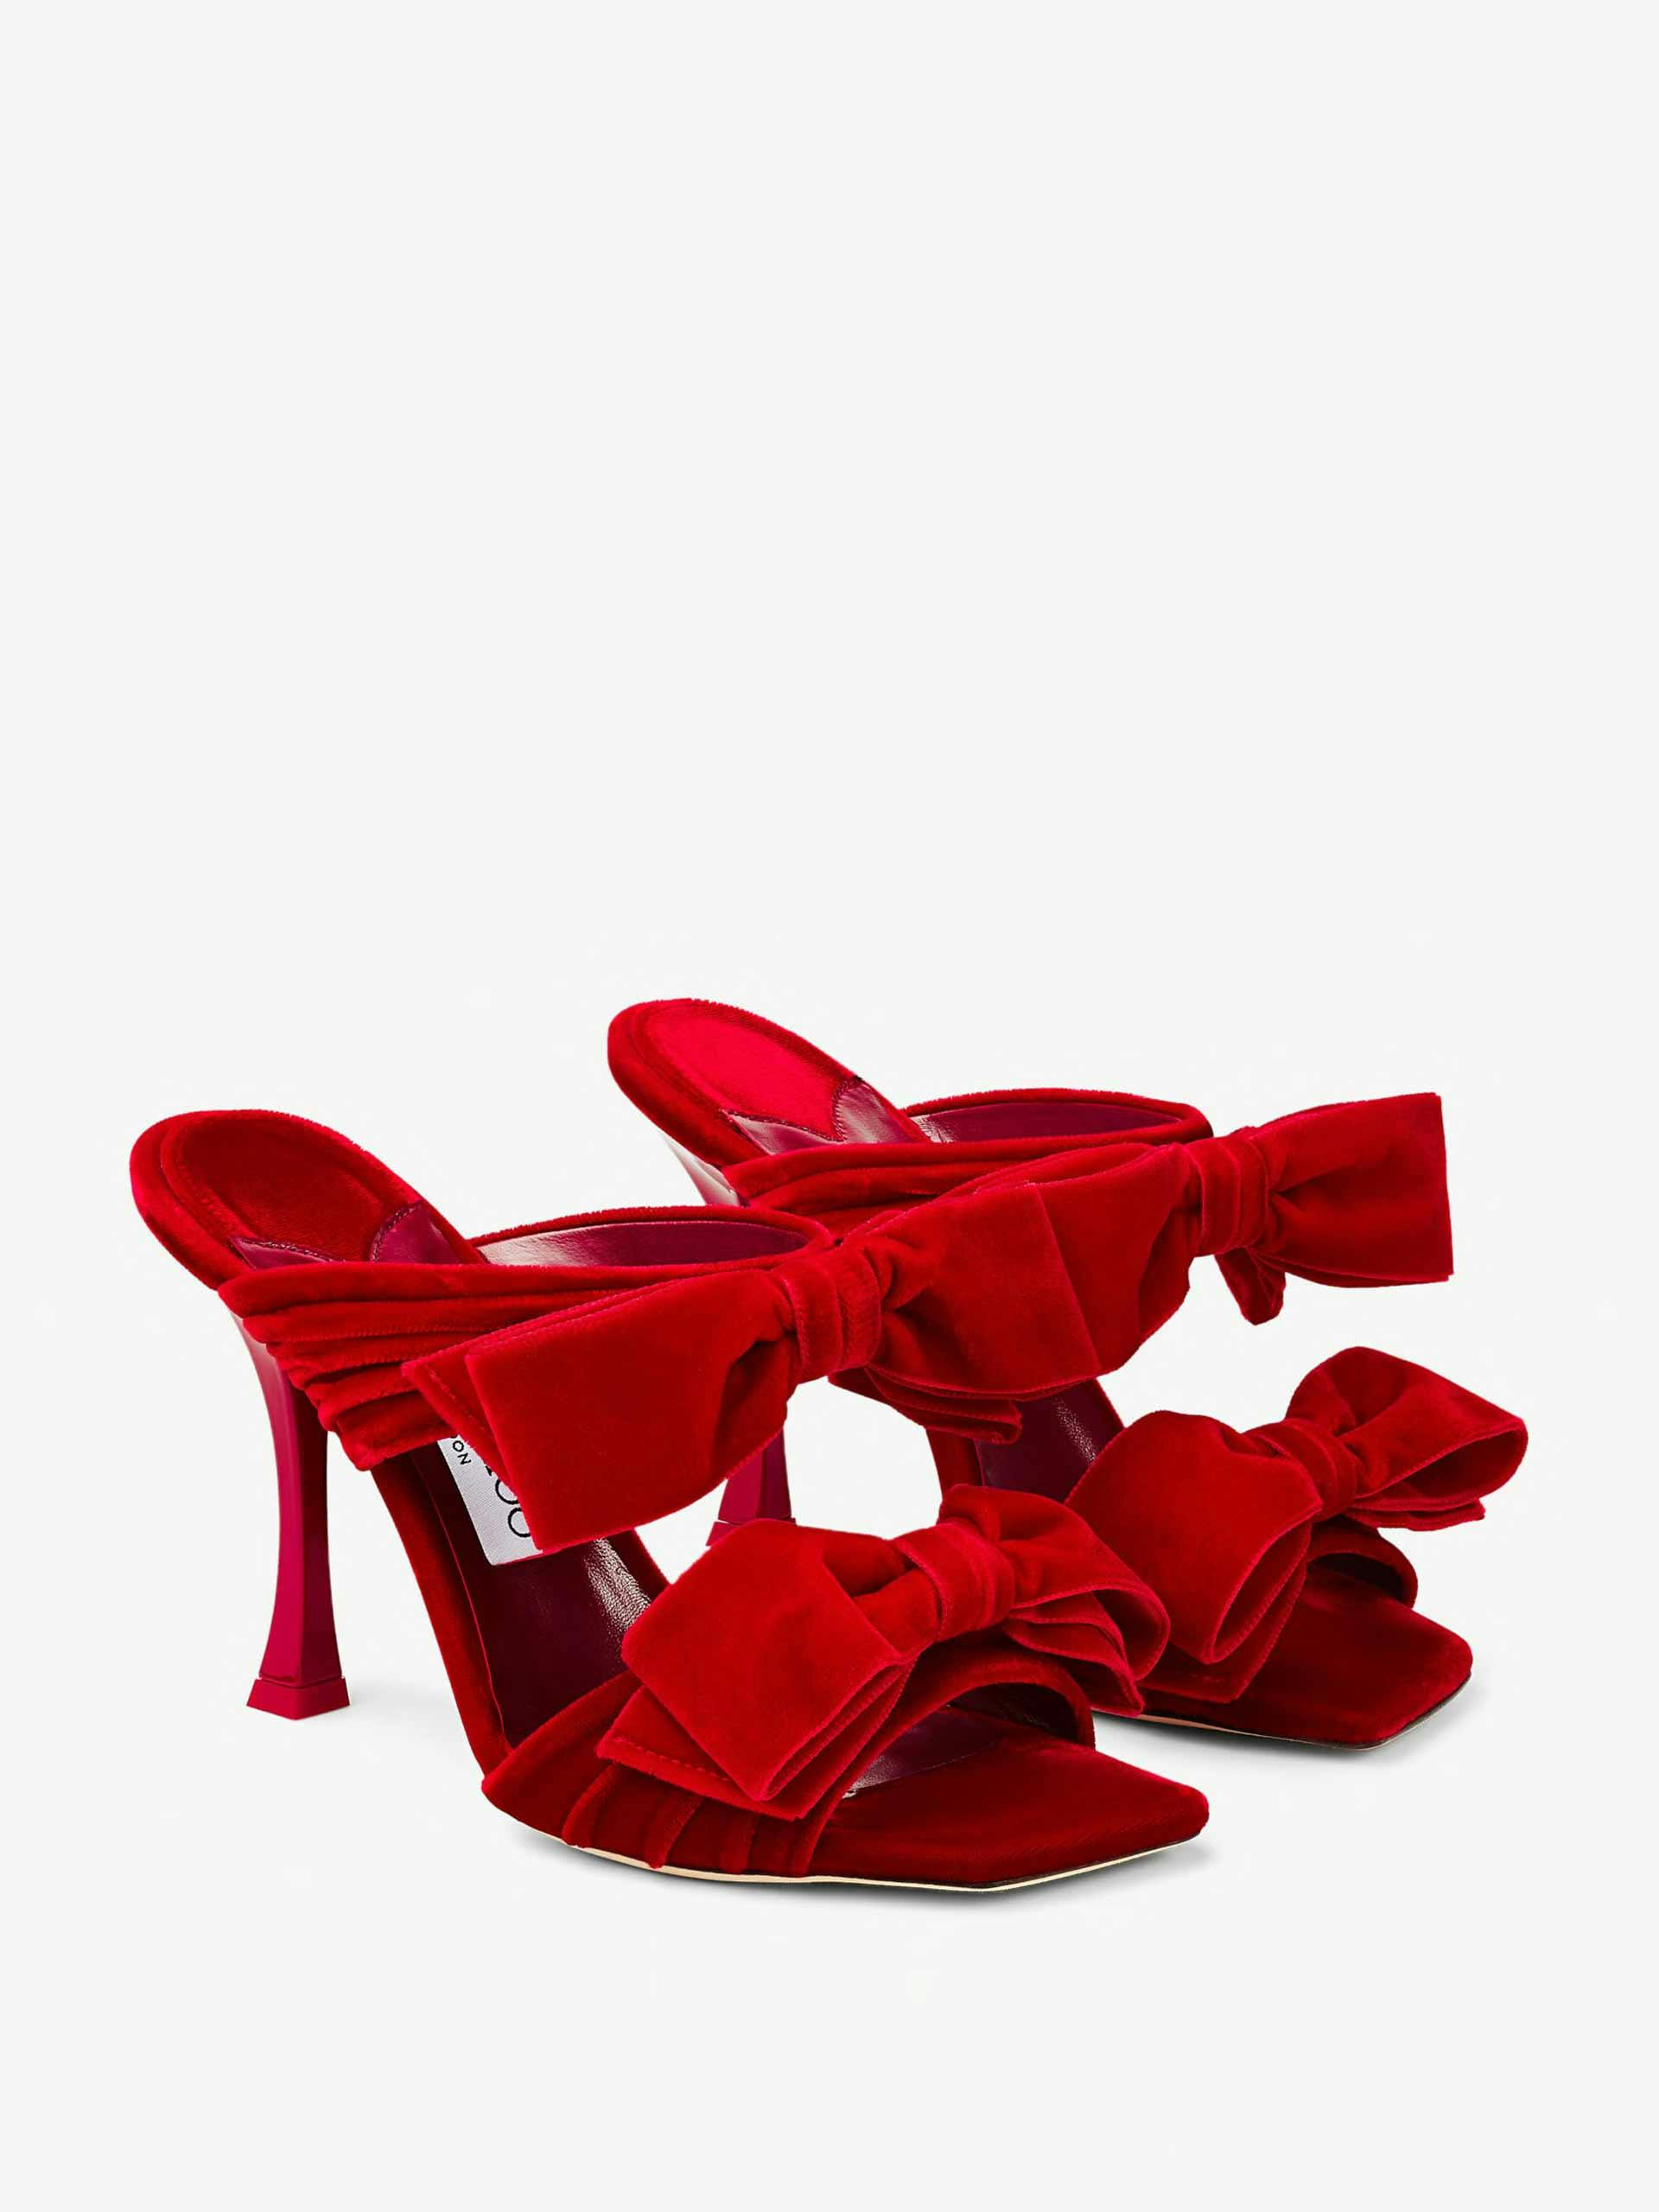 Red velvet sandals with bows